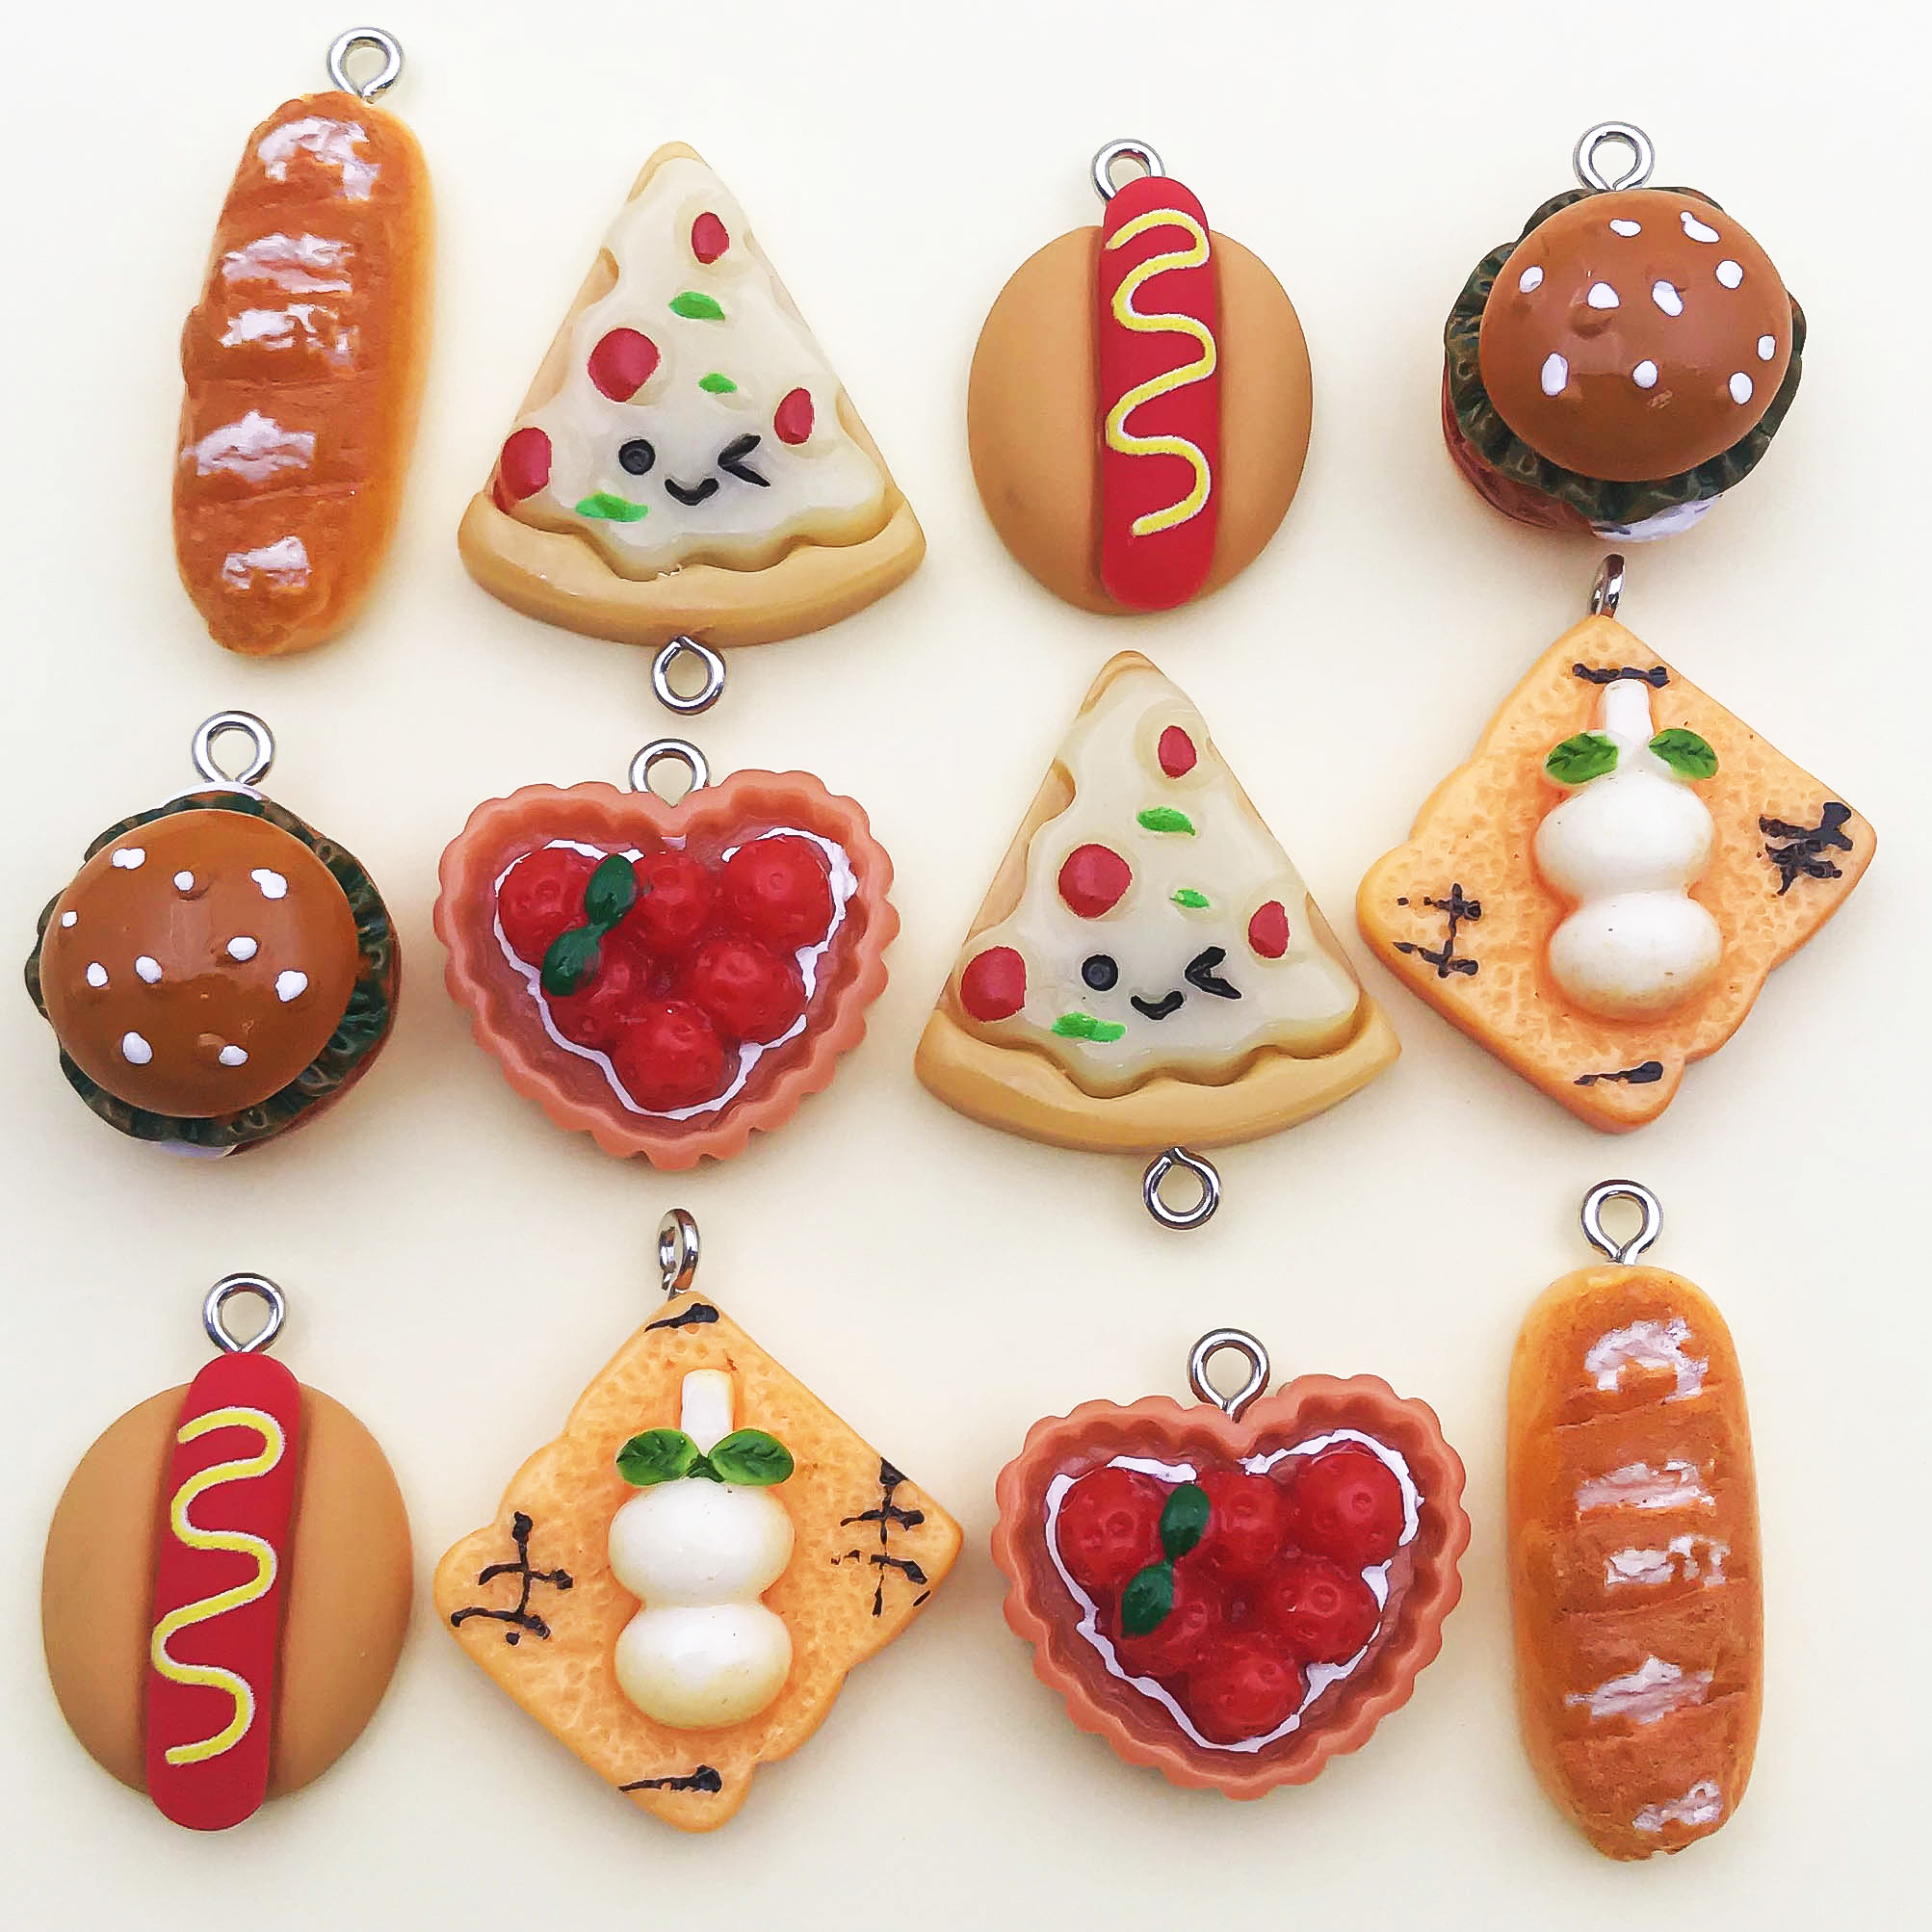 UR URLIFEHALL 40 Pcs Resin Food Charms Cookie Pizza Croissant Hot Dog  Charms Opaque 3D Imitation Food Charms with Loops for Jewelry Making